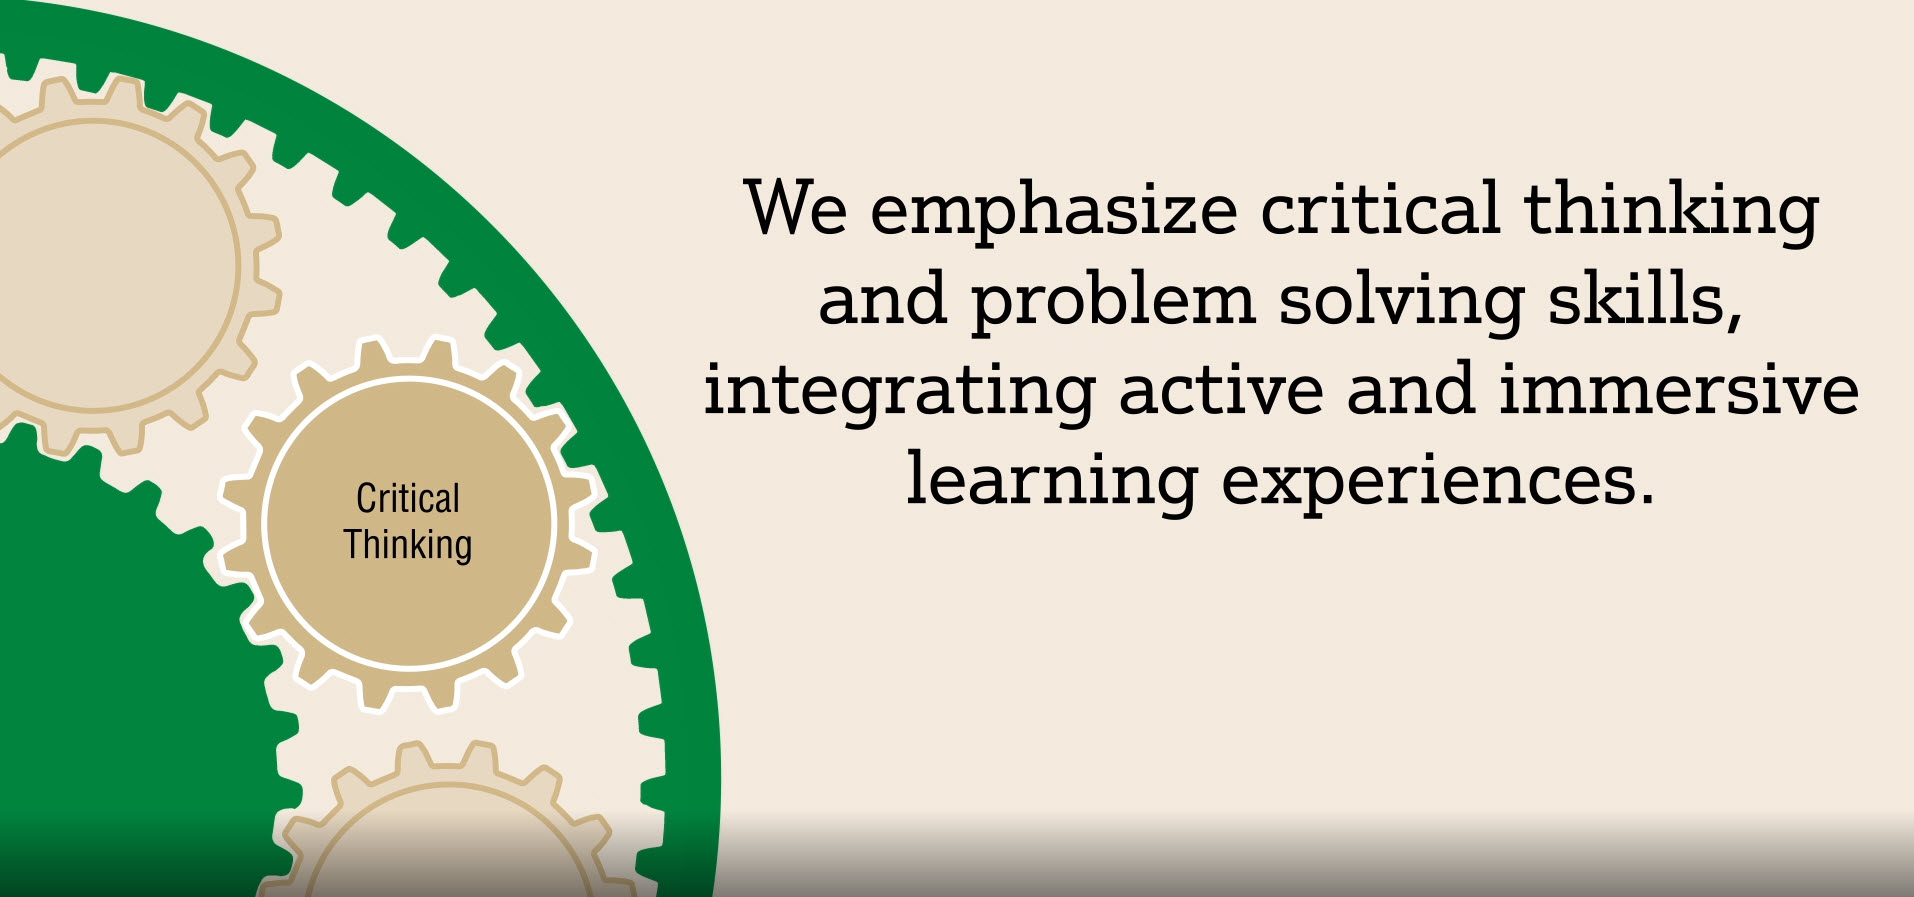 We emphasize critical thinking and problem solving skills, integrating active and immersive learning experiences.